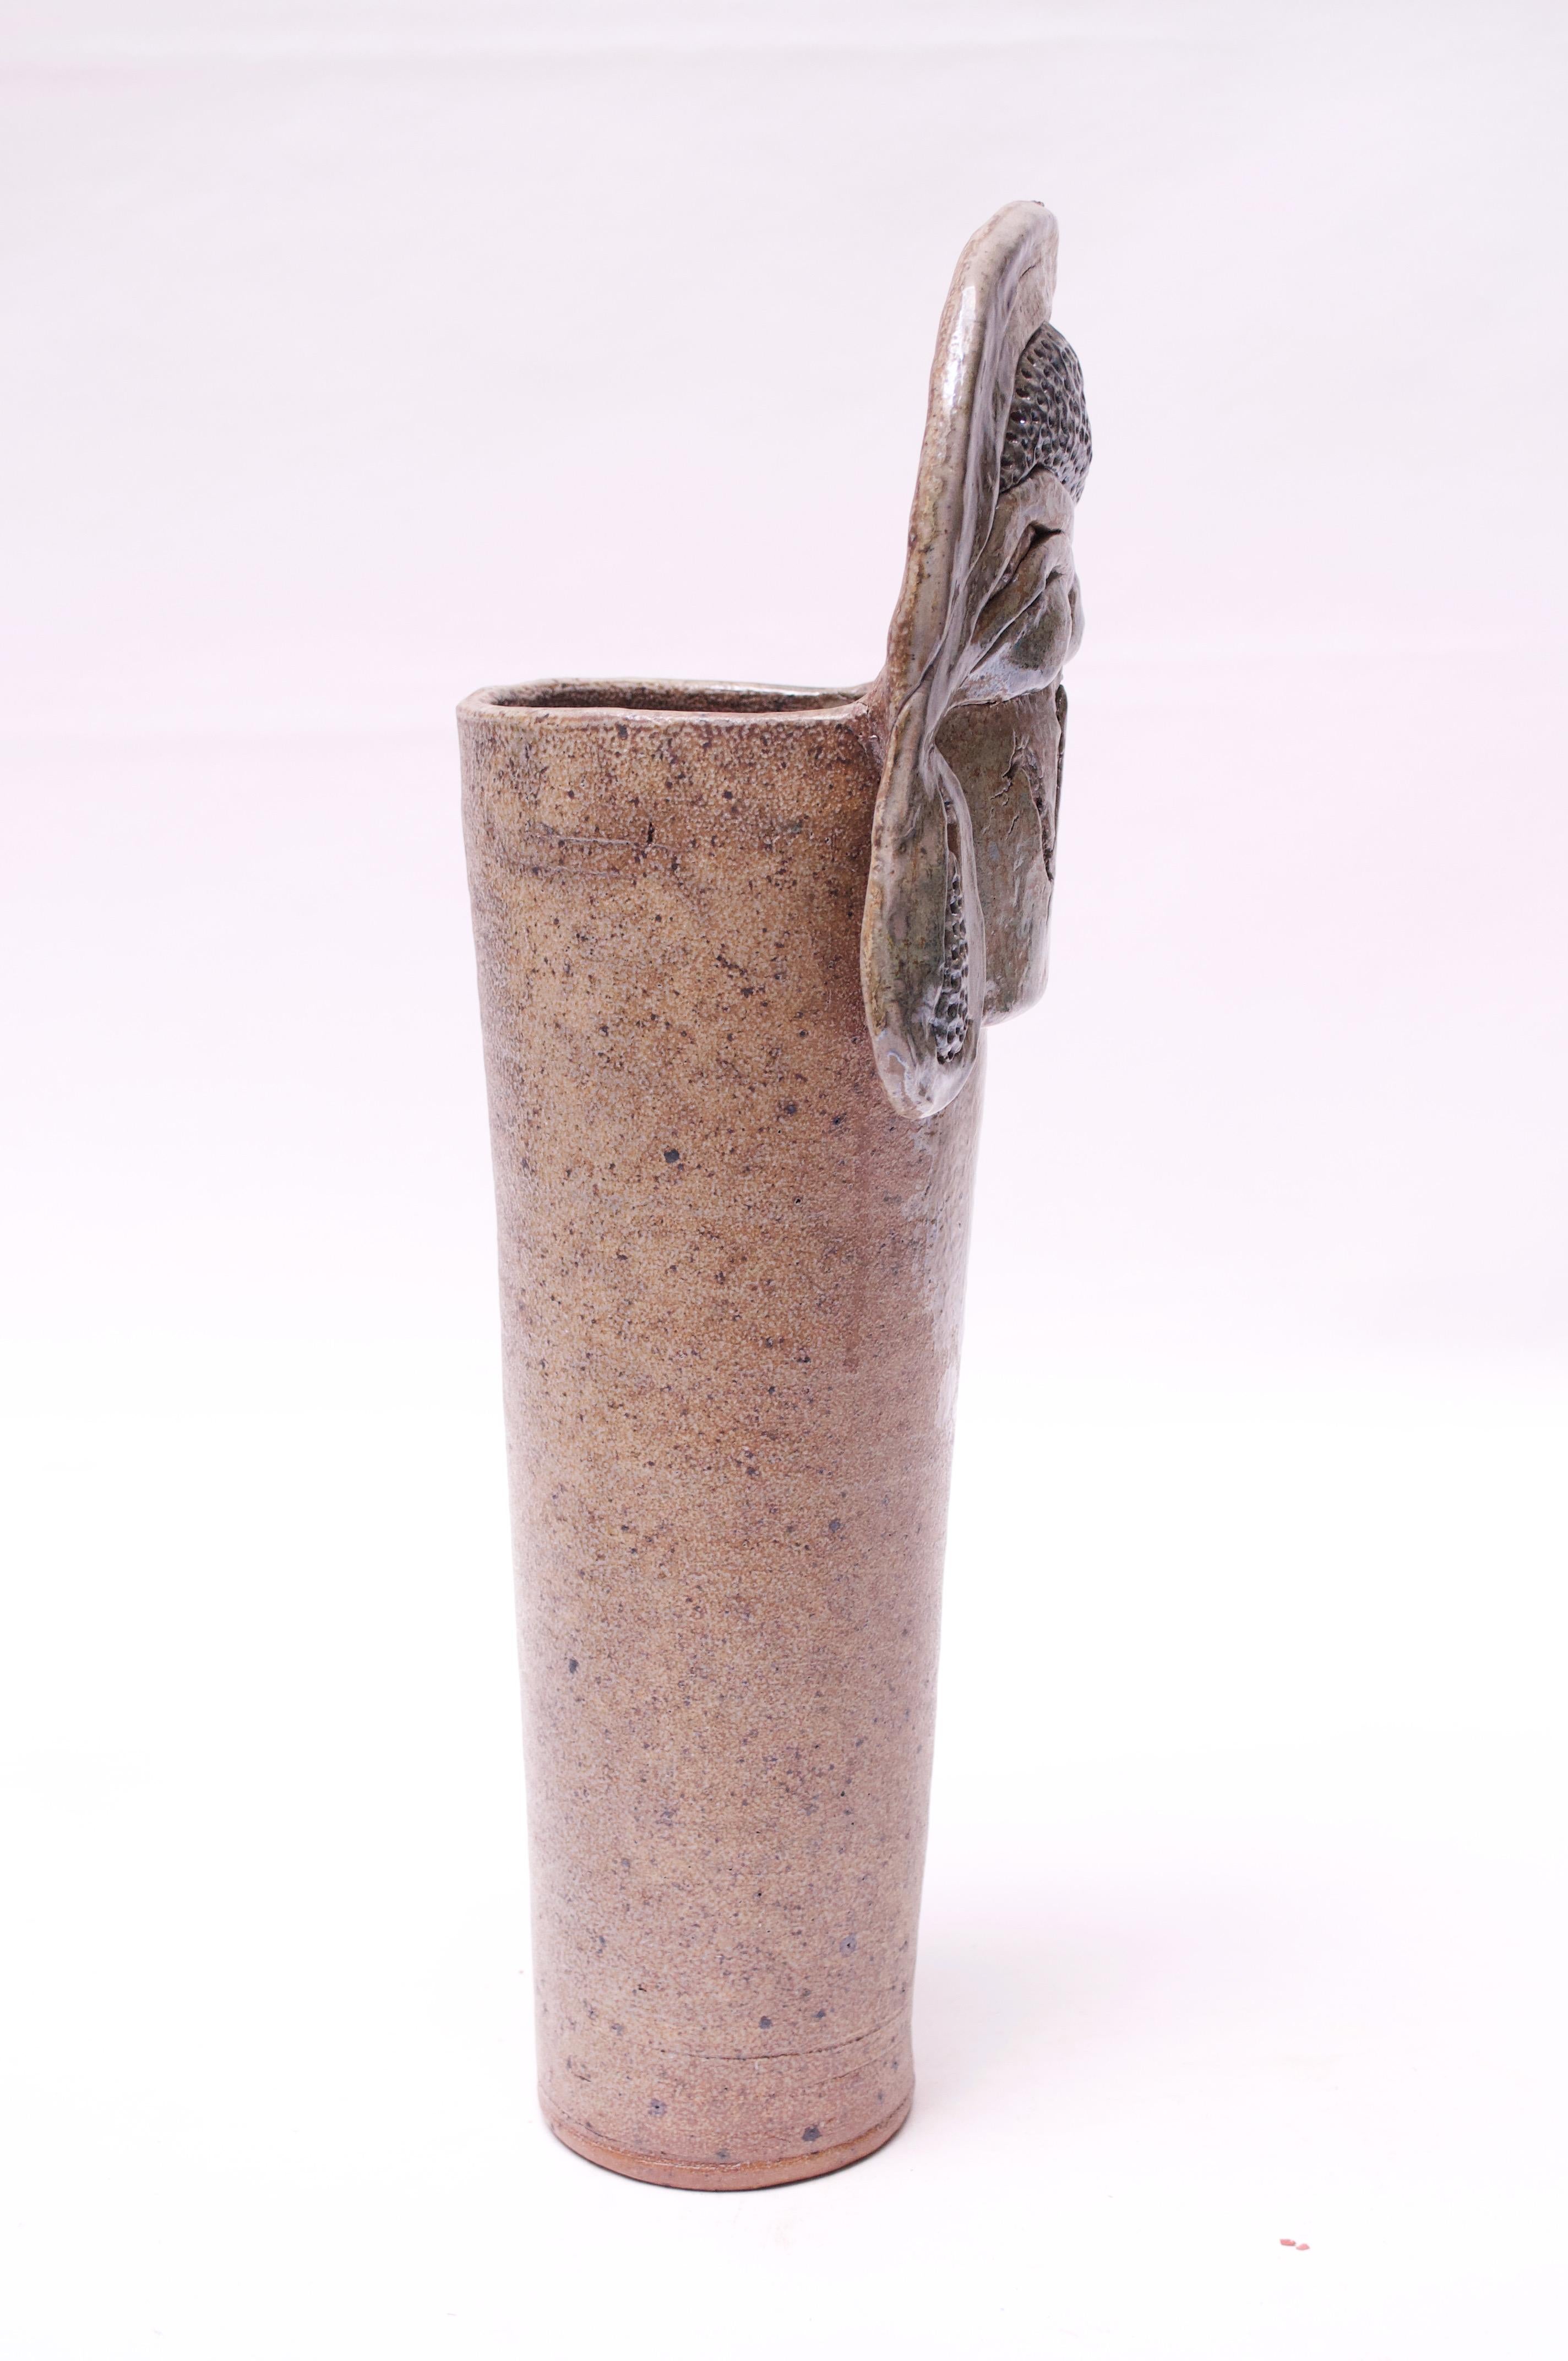 Striking and unique stoneware vase made in 1976 by ceramicist, Pollack. Interesting incorporation of textures and patterns - a matte-beige mottled surface with a slight metallic sheen and applied metallic fragments. Signed 